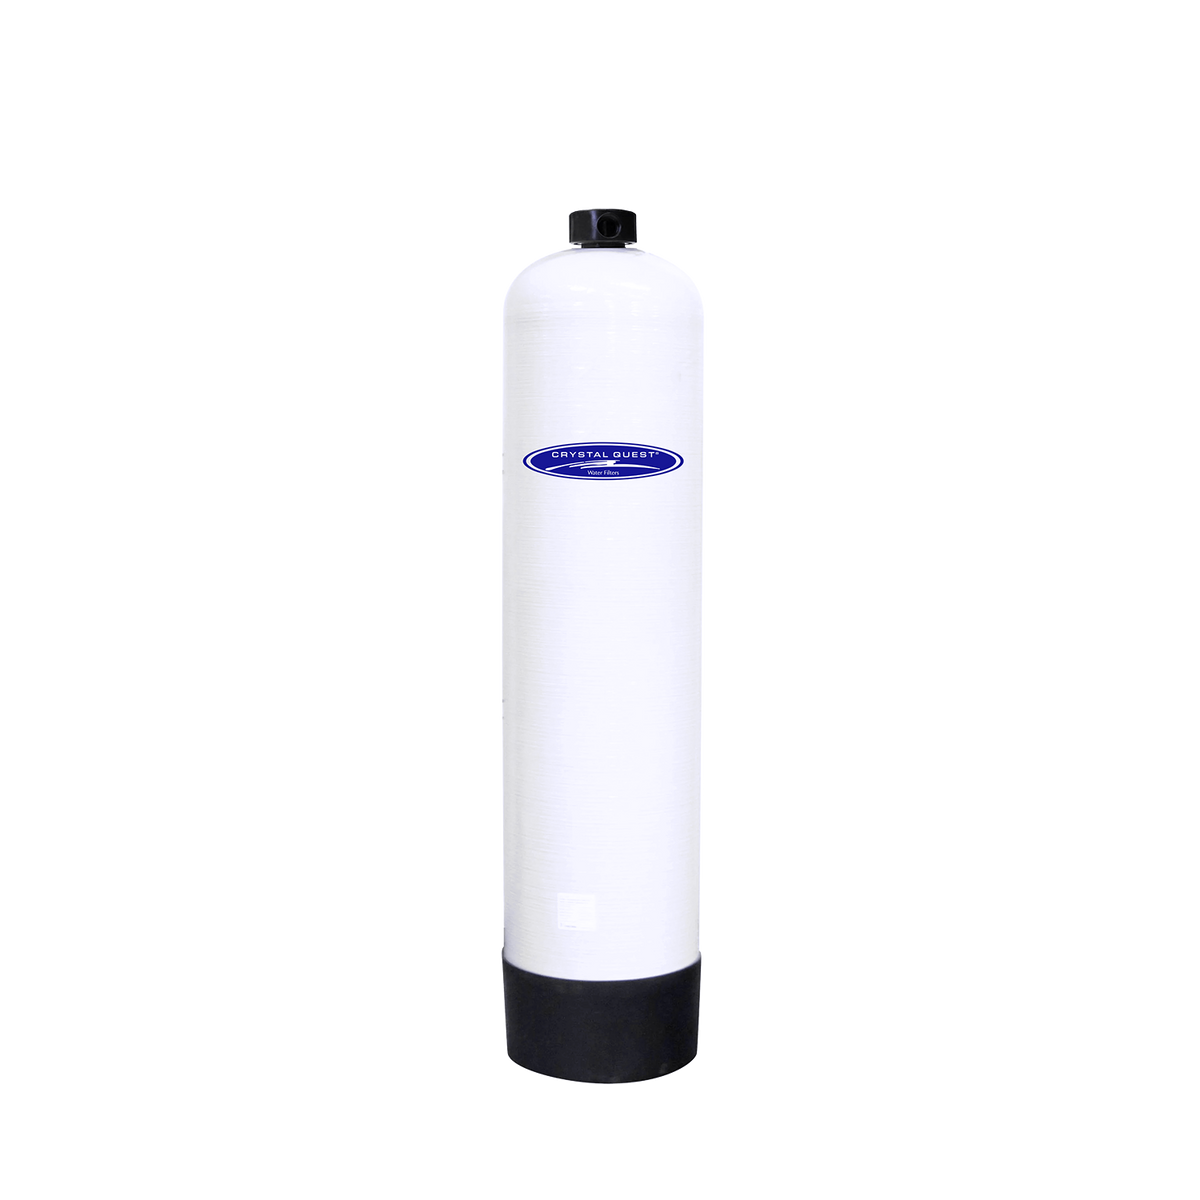 20 GPM / Aluminum Oxide / Manual (Upflow) Fluoride Removal Water Filtration System - Commercial - Crystal Quest